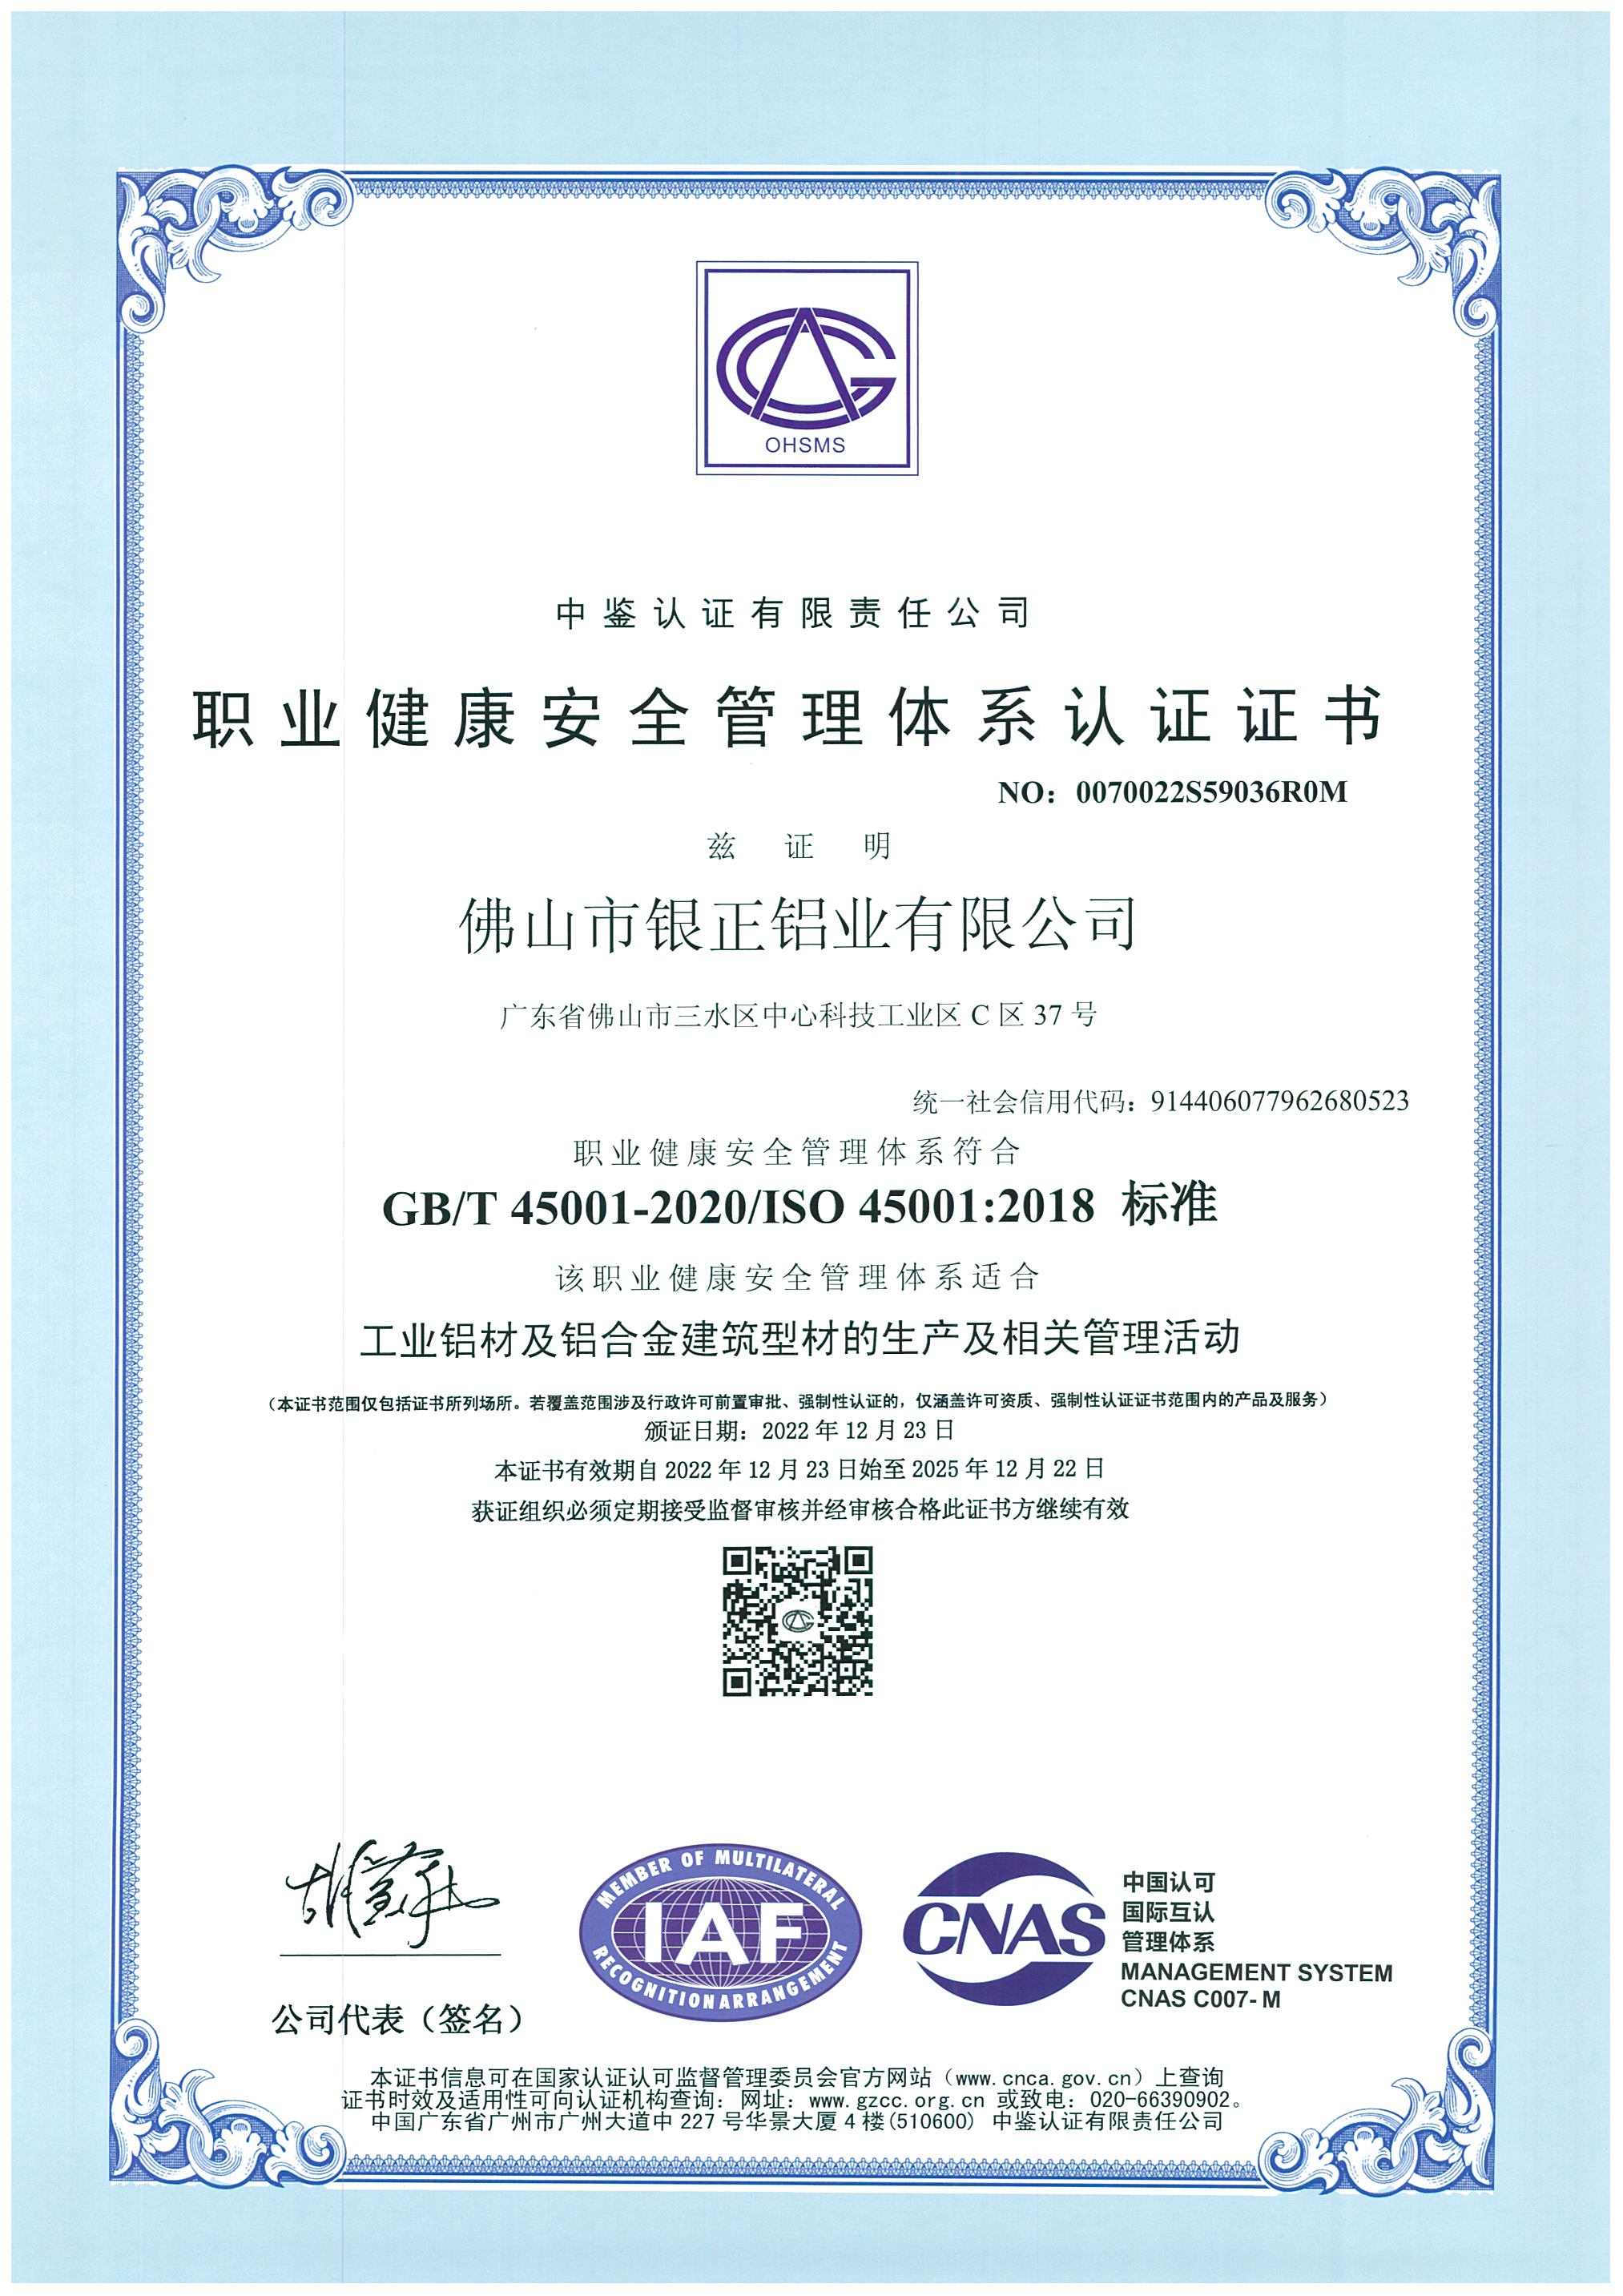 Certificate of occupational health and safety management system